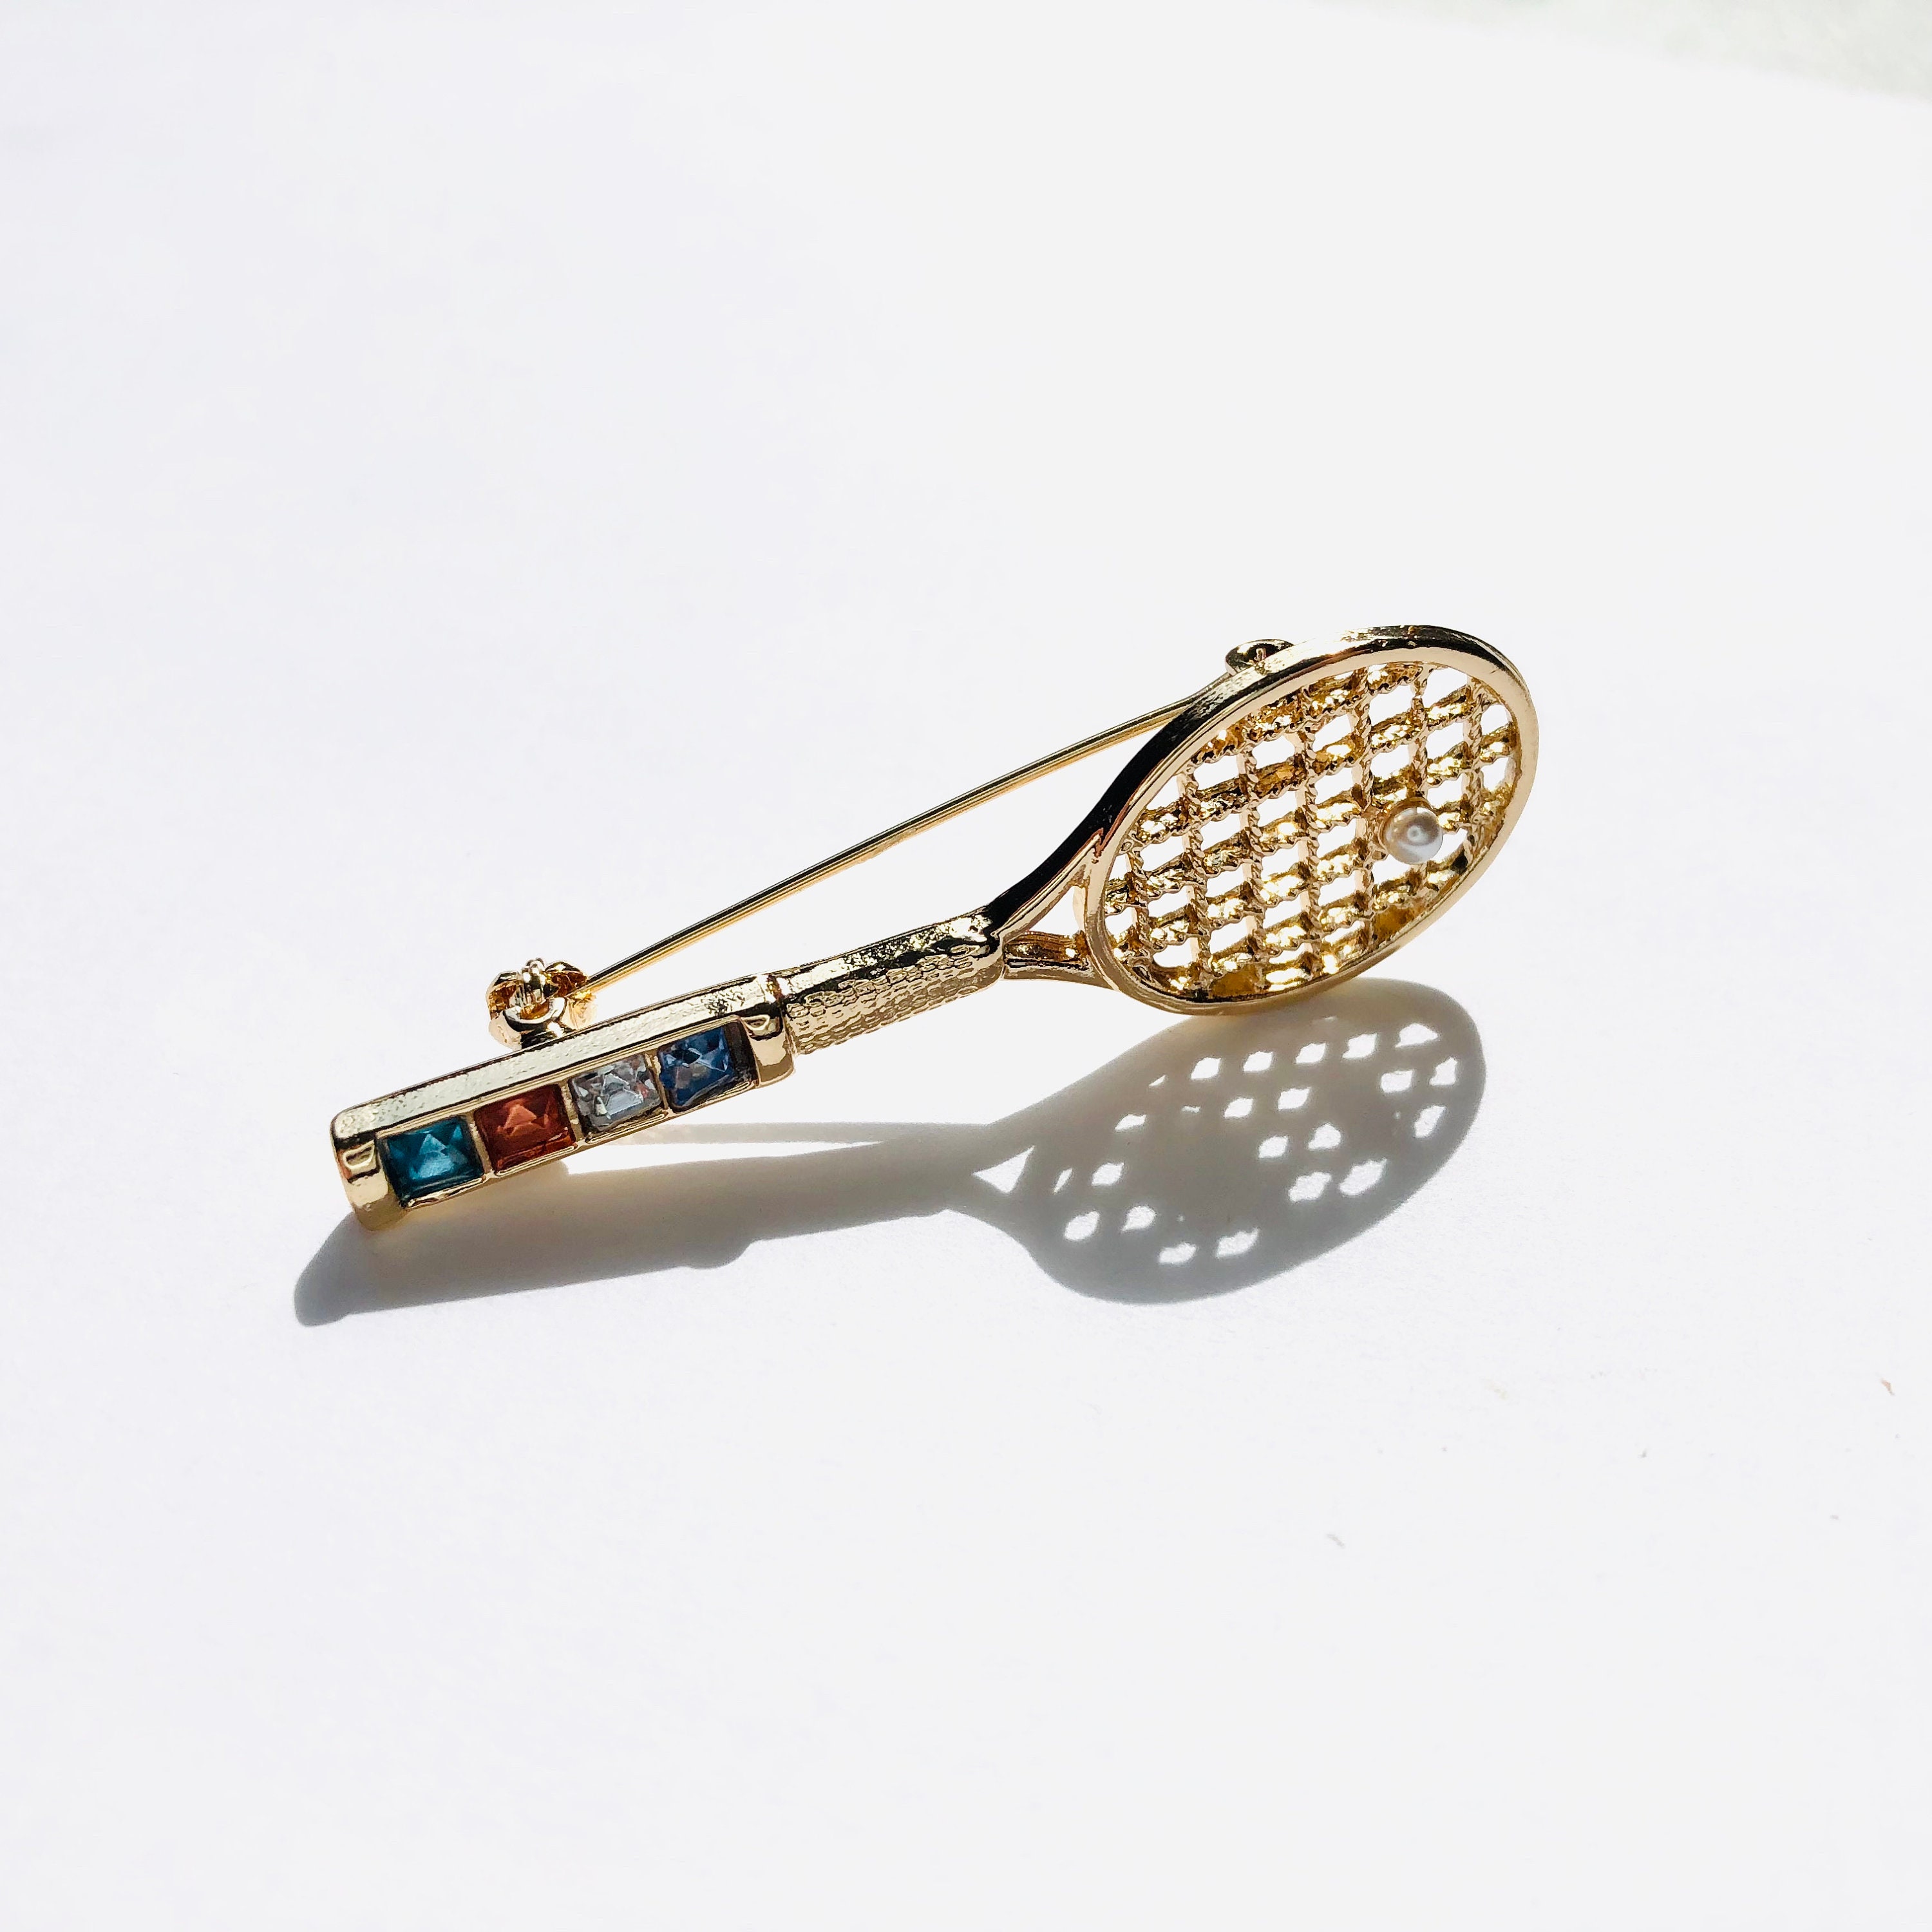 Gold-tone Hollow Out Rhinestone Crystal Tennis Racket Faux - Etsy